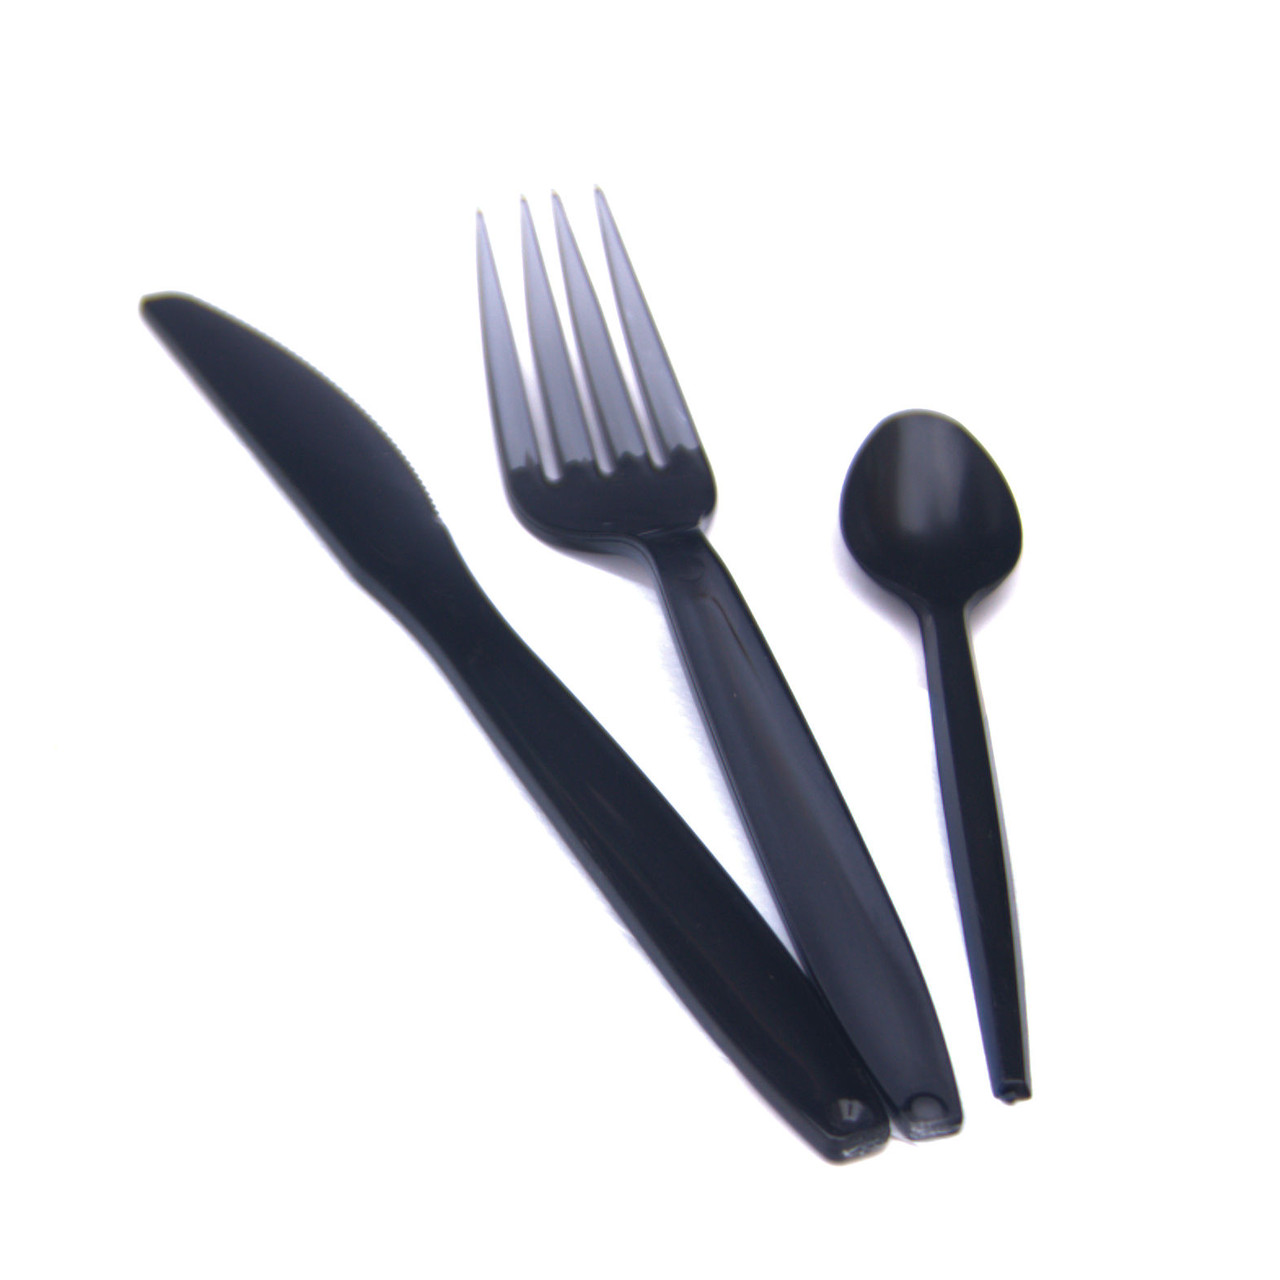 20 Packs of Individually Wrapped Disposable Quality Black Plastic Cutlery Set with Napkin